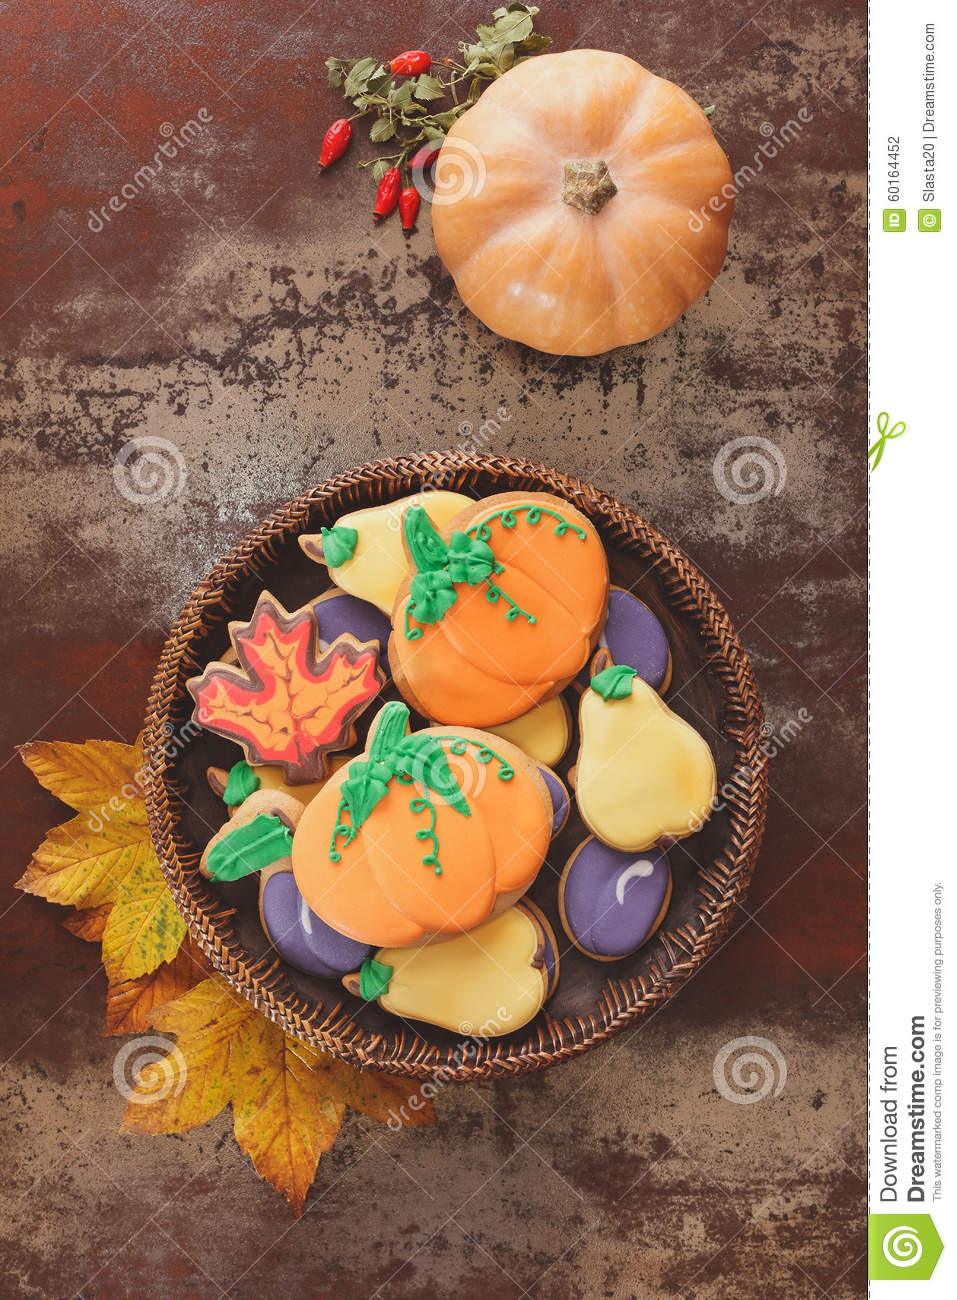 Thanksgiving Cookies And Squash On Rustic Table  Stock Photo   Image    